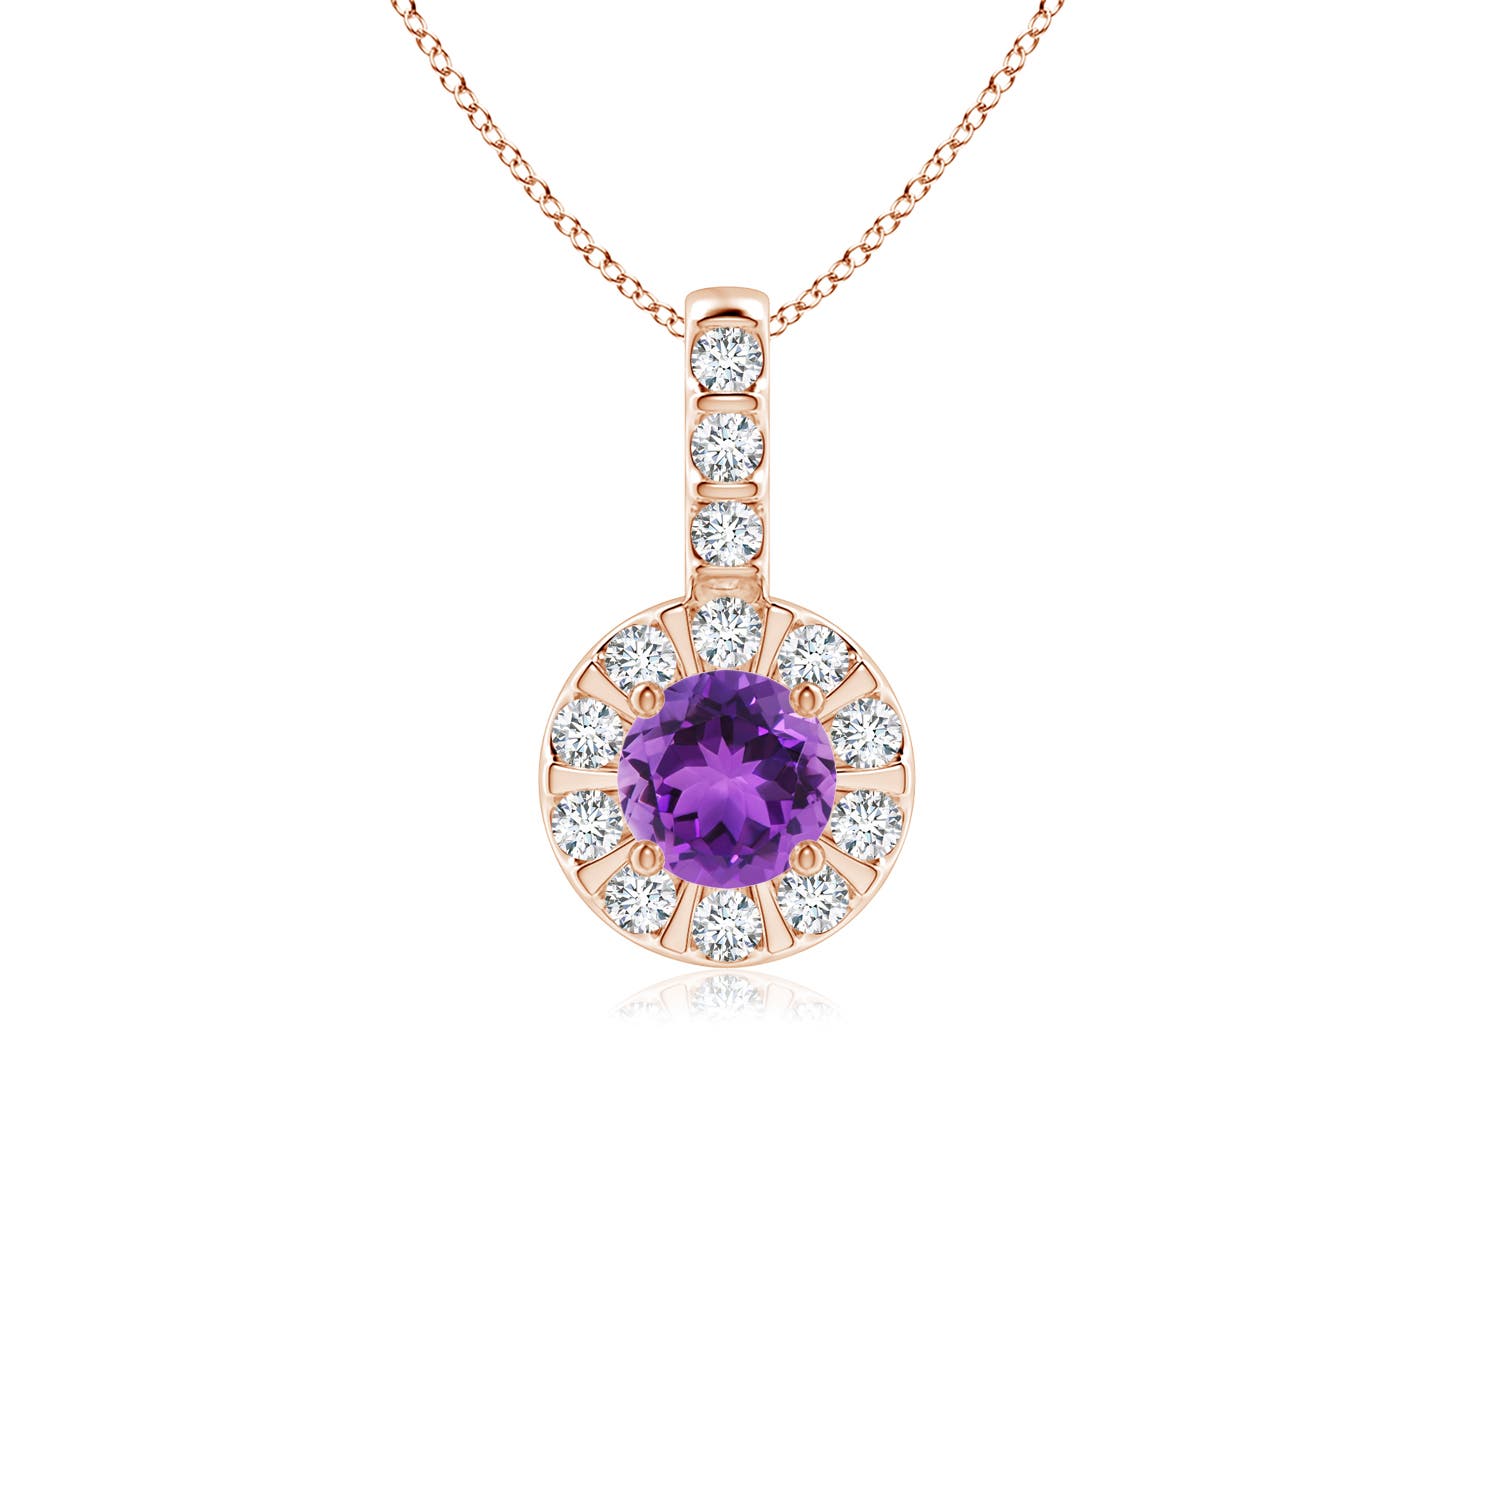 AAA - Amethyst / 0.38 CT / 14 KT Rose Gold